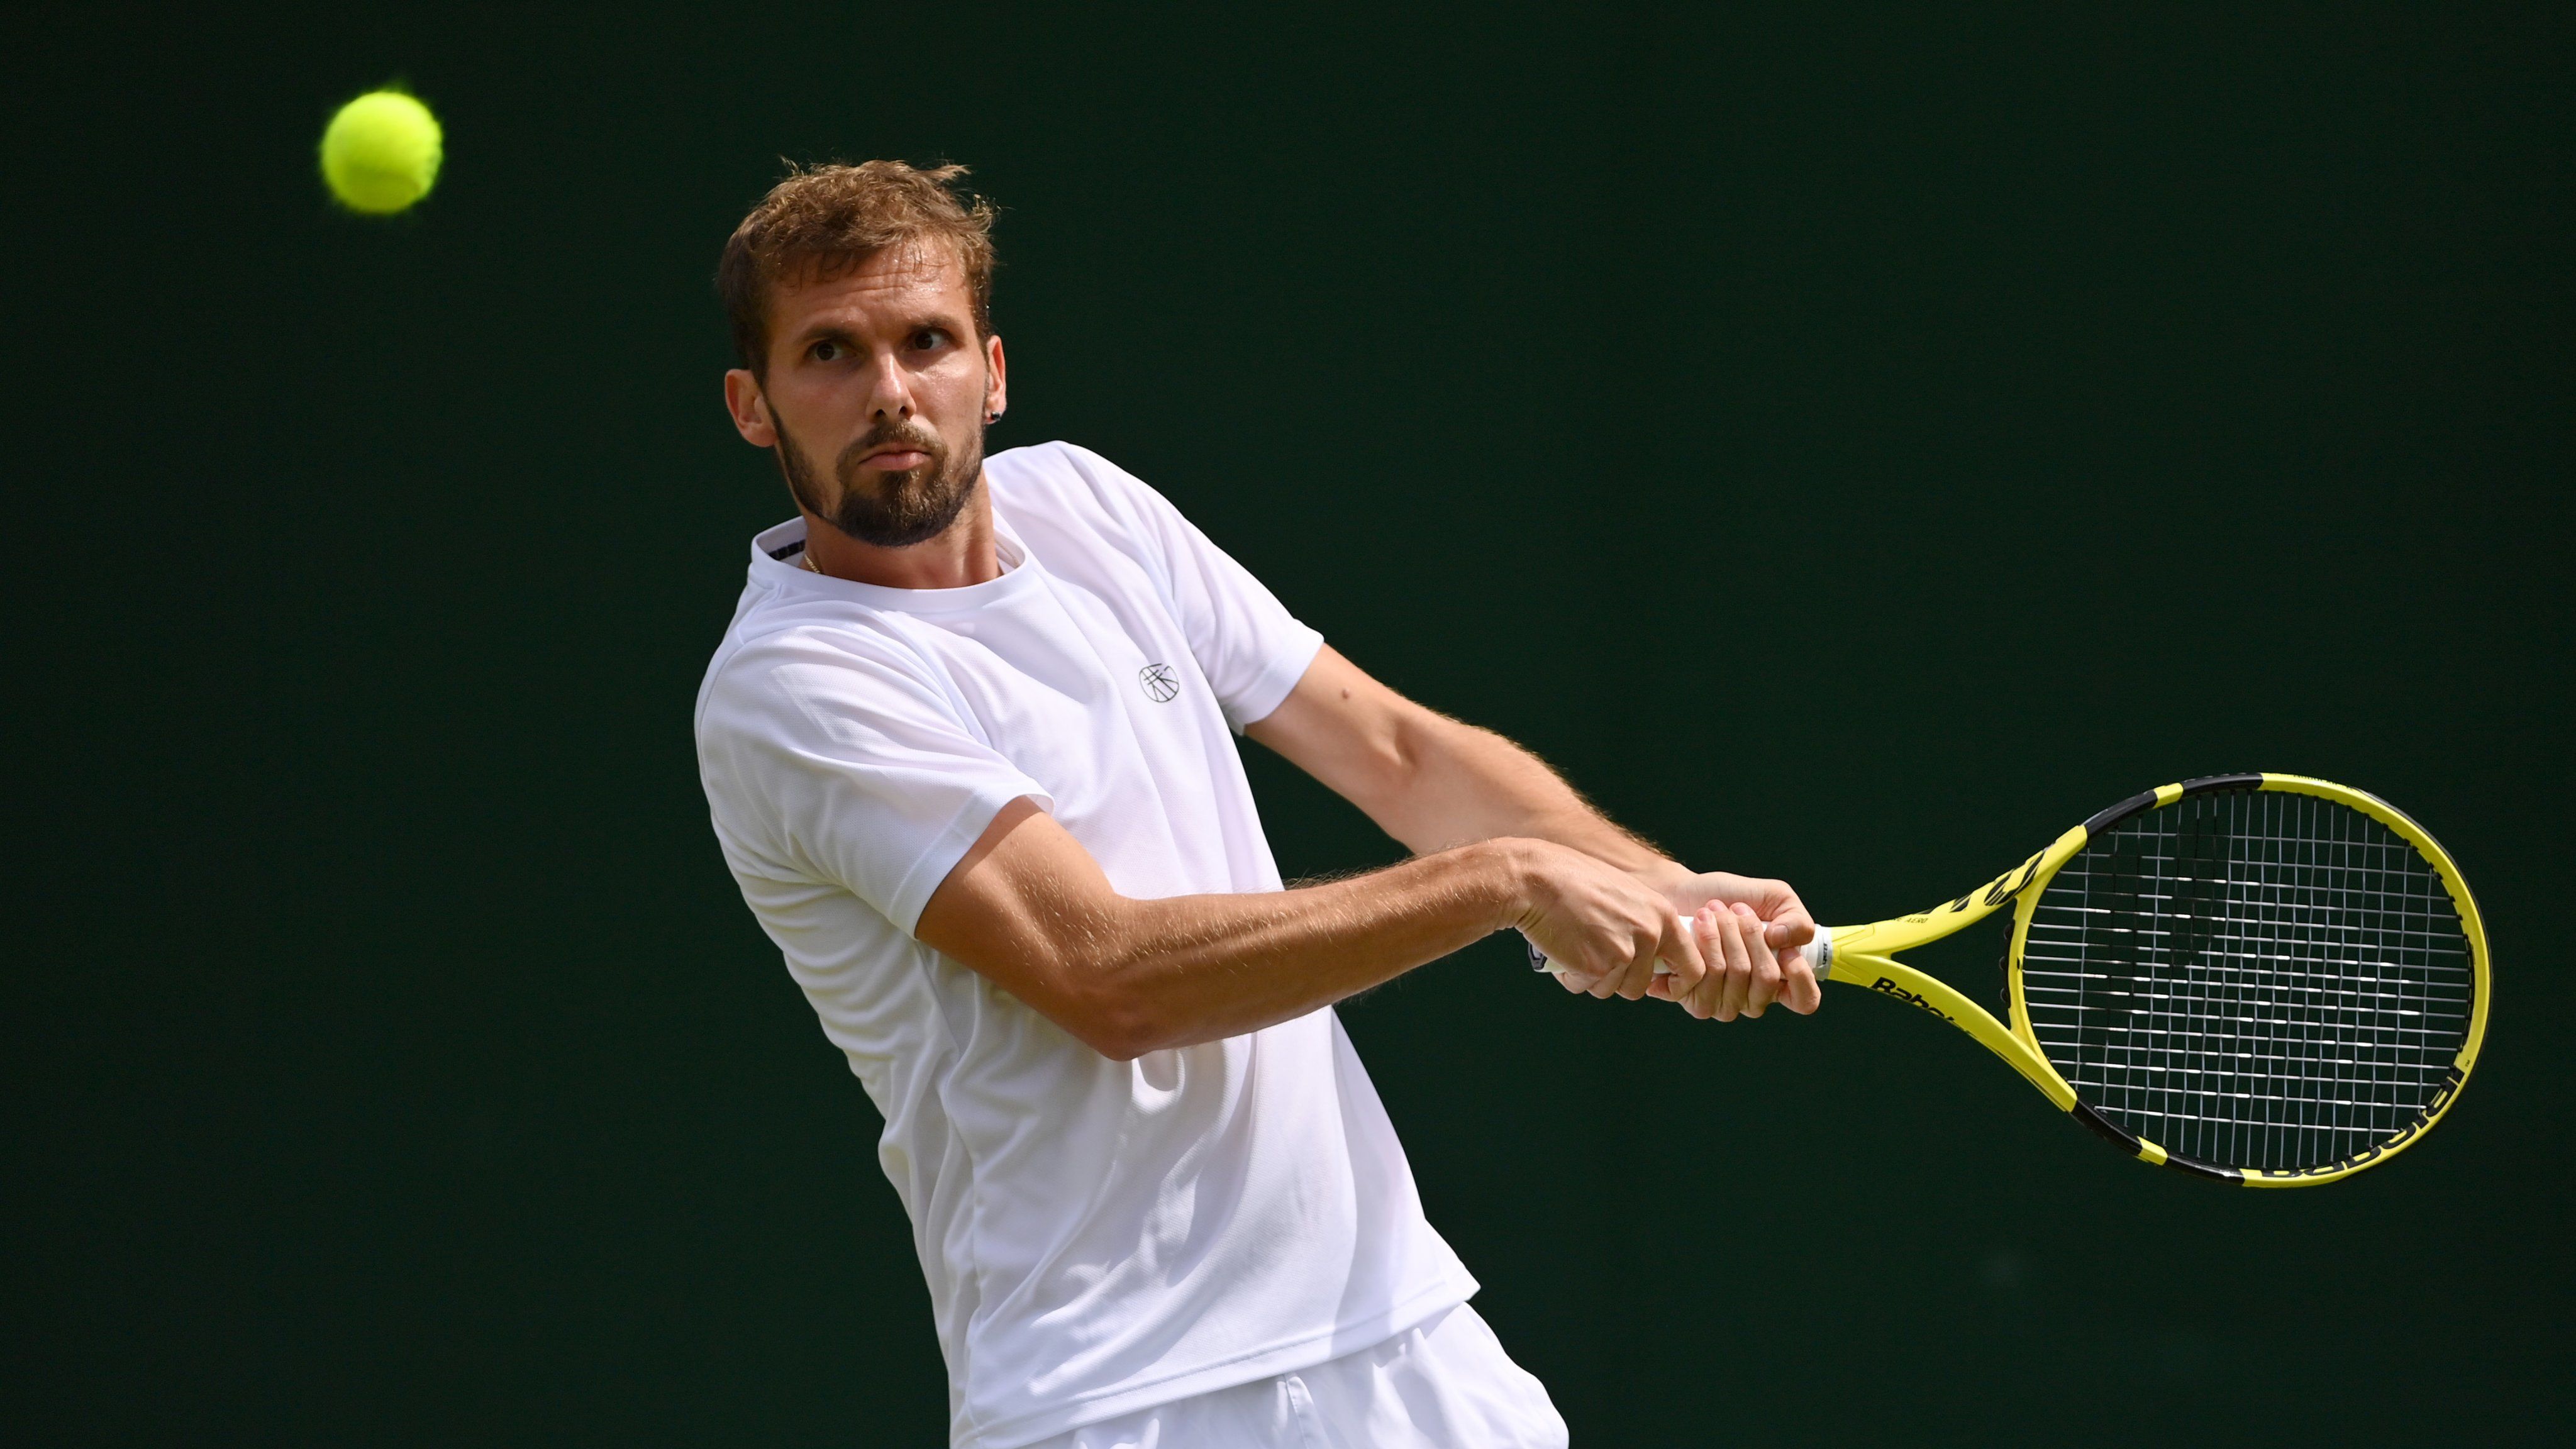 Oscar Otte vs Carlos Alcaraz Wimbledon 2022: How and where to watch online for free, 1 July